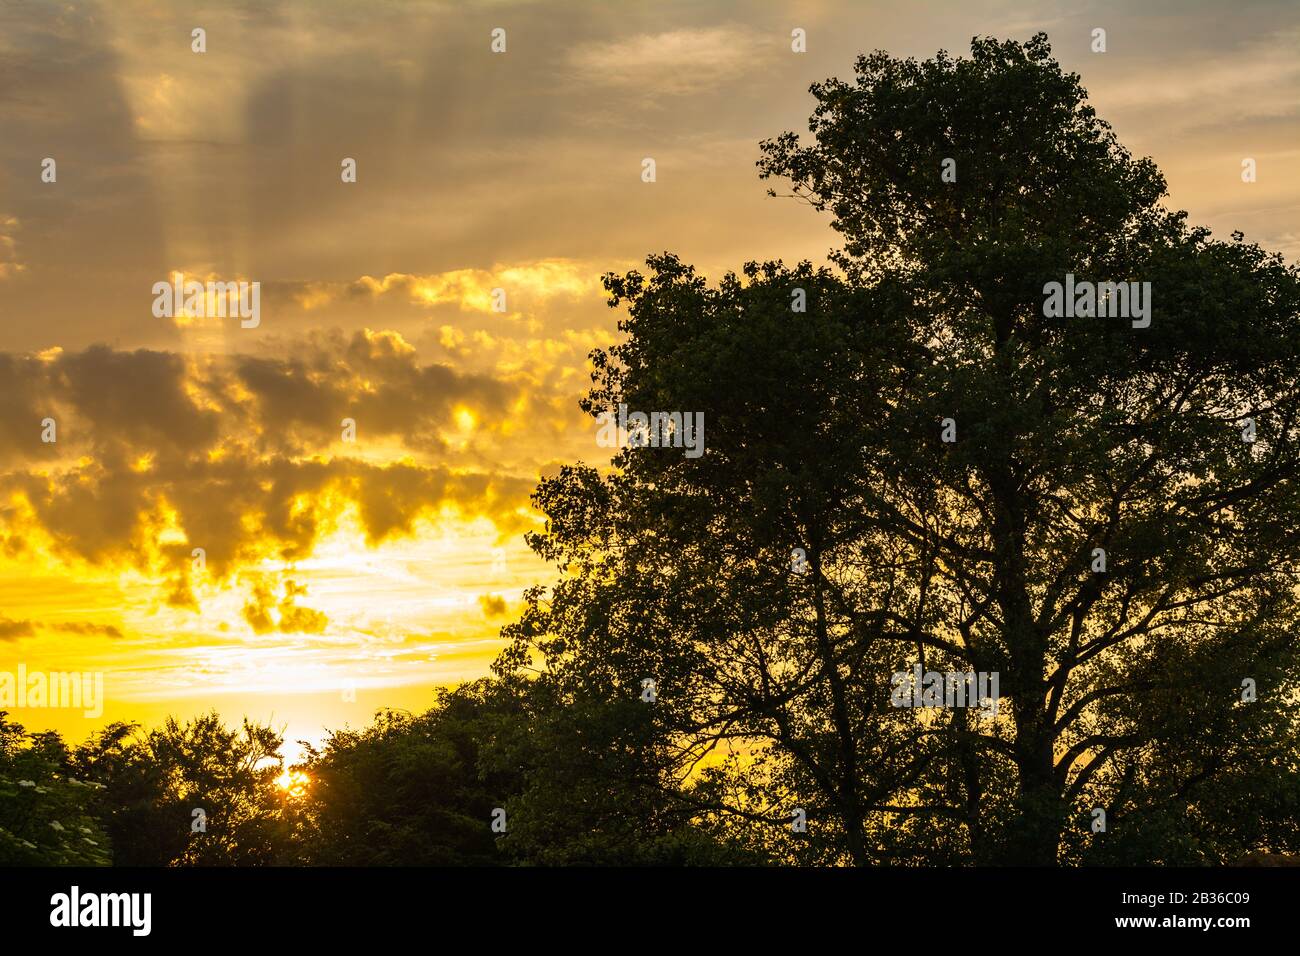 Sunrise through a tree. Sun rising through trees in Summer in the UK. Stock Photo